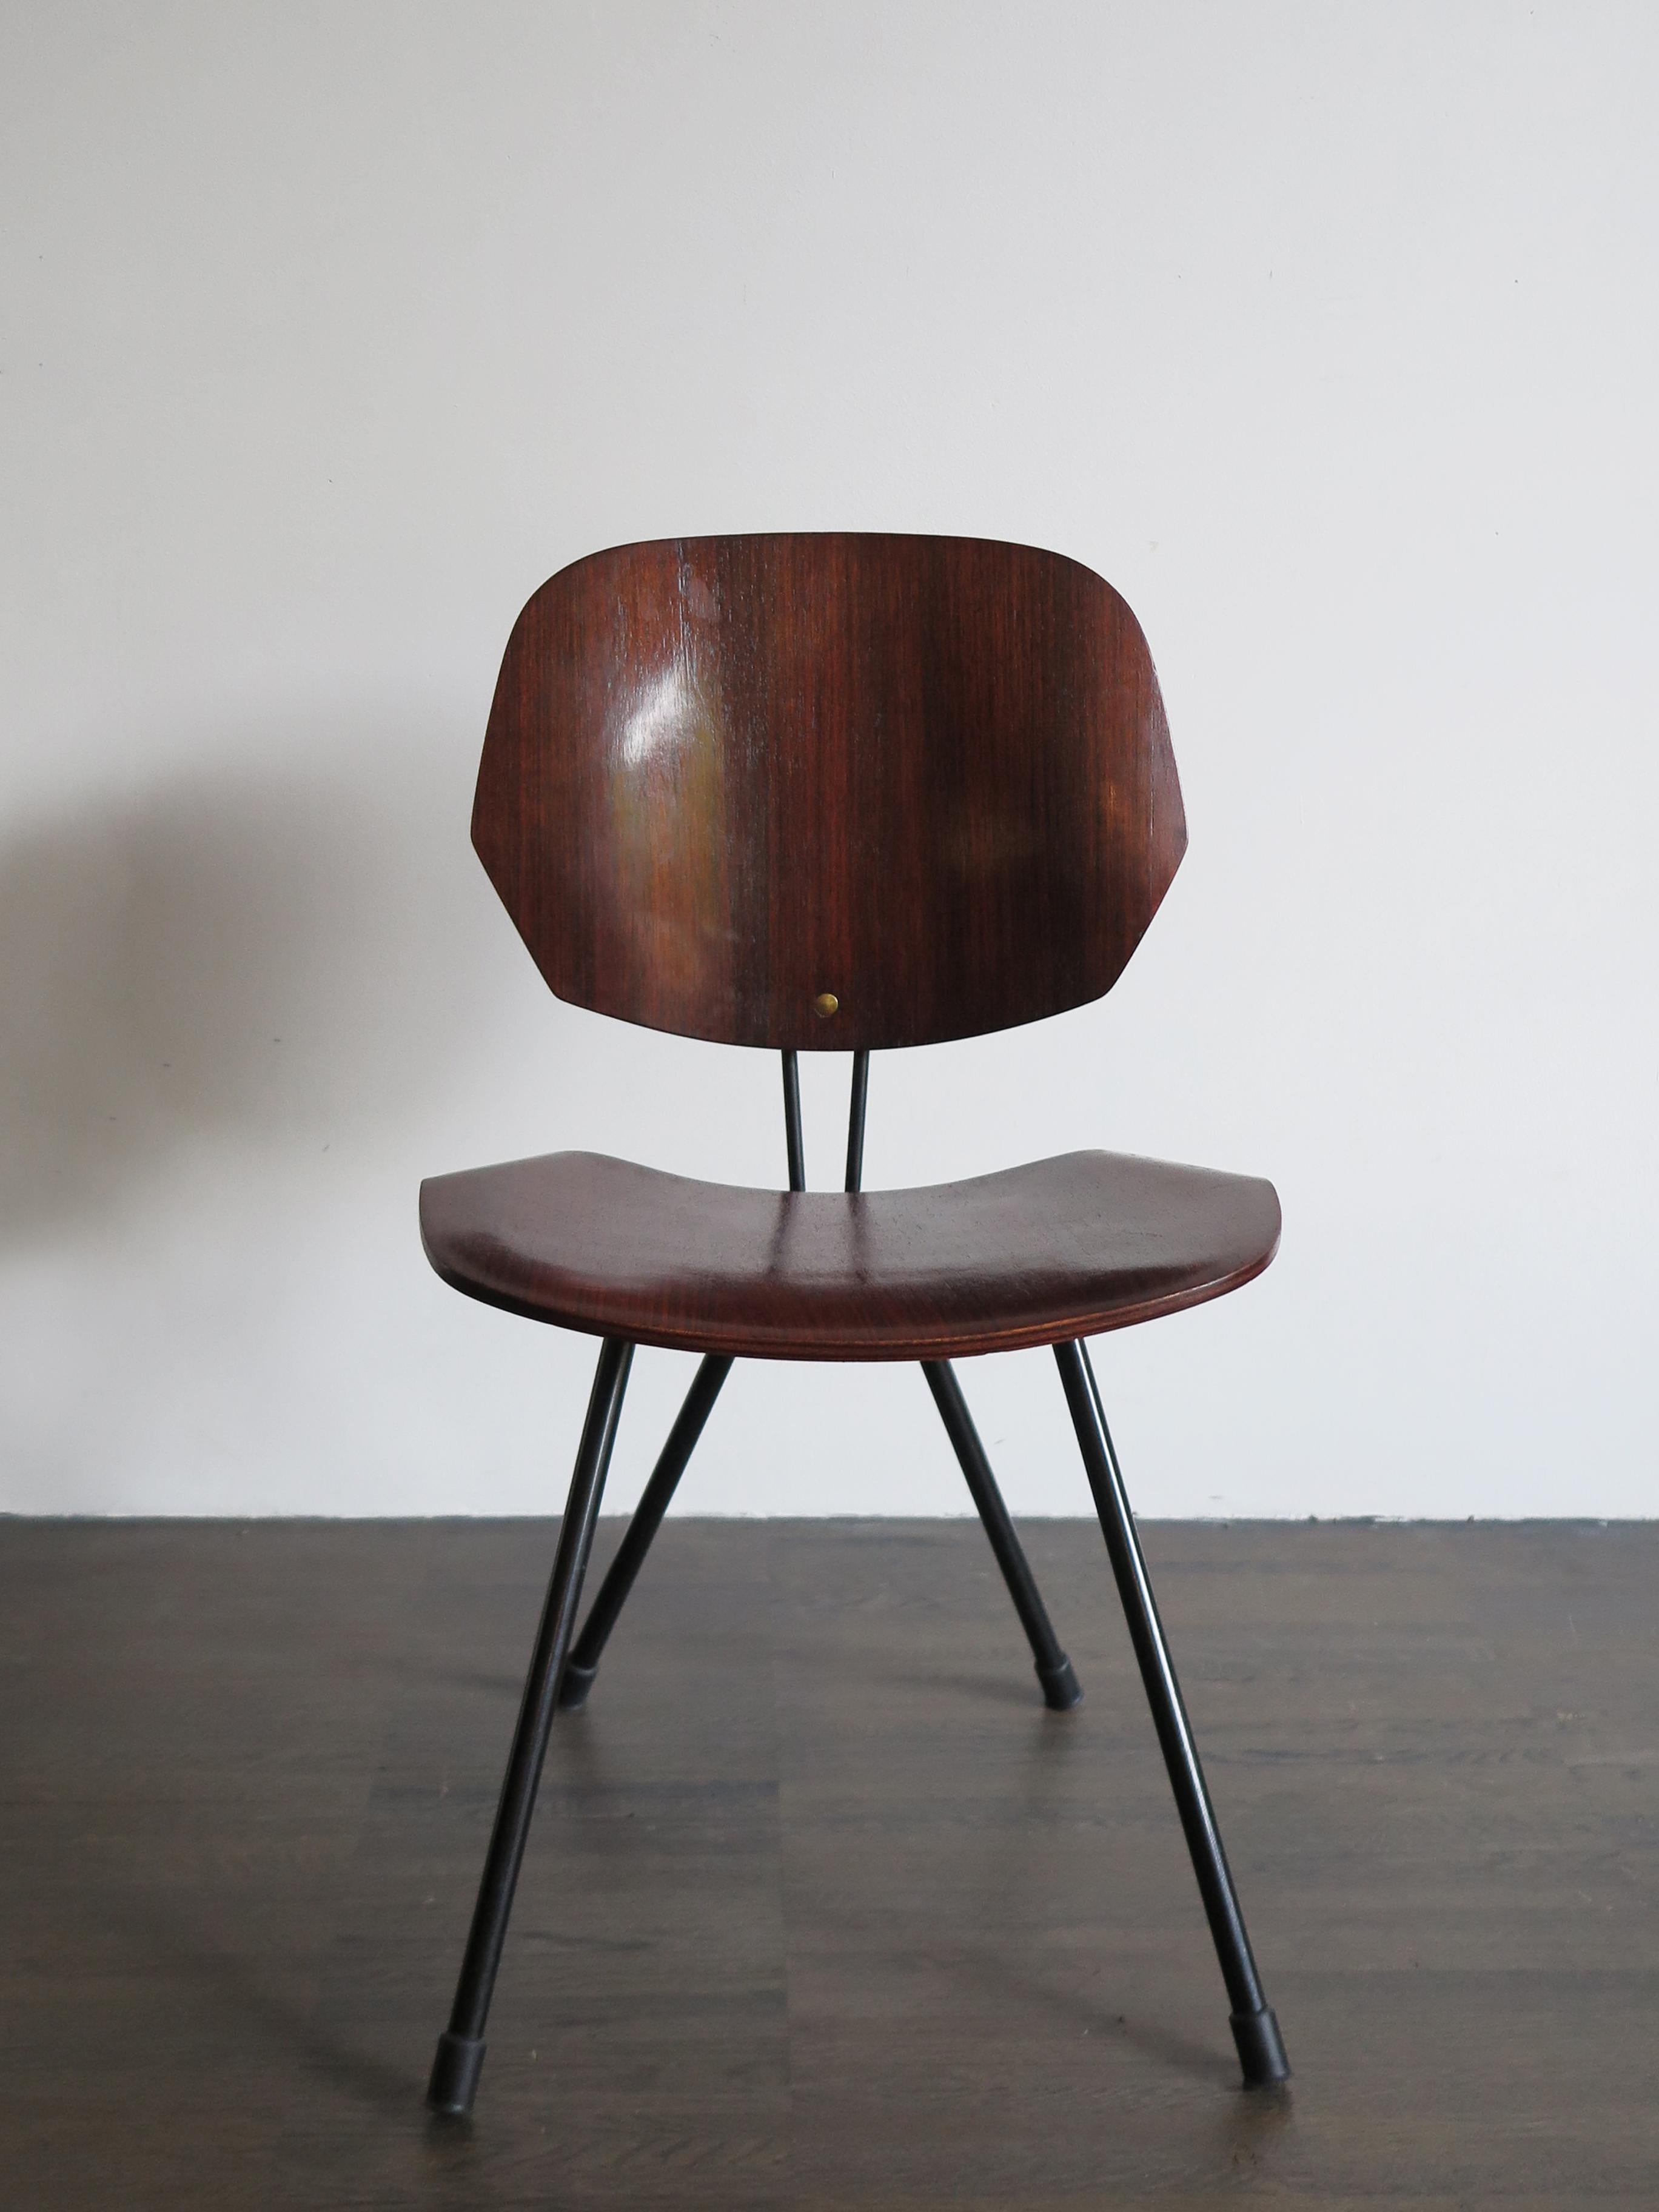 Italian midcentury modern design iconic folding chair model S88 designed by Osvaldo Borsani for Tecno with a painted metal frame and seat and backrest of curved plywood veneered in rosewood, 1957.
All parts revolve around a single